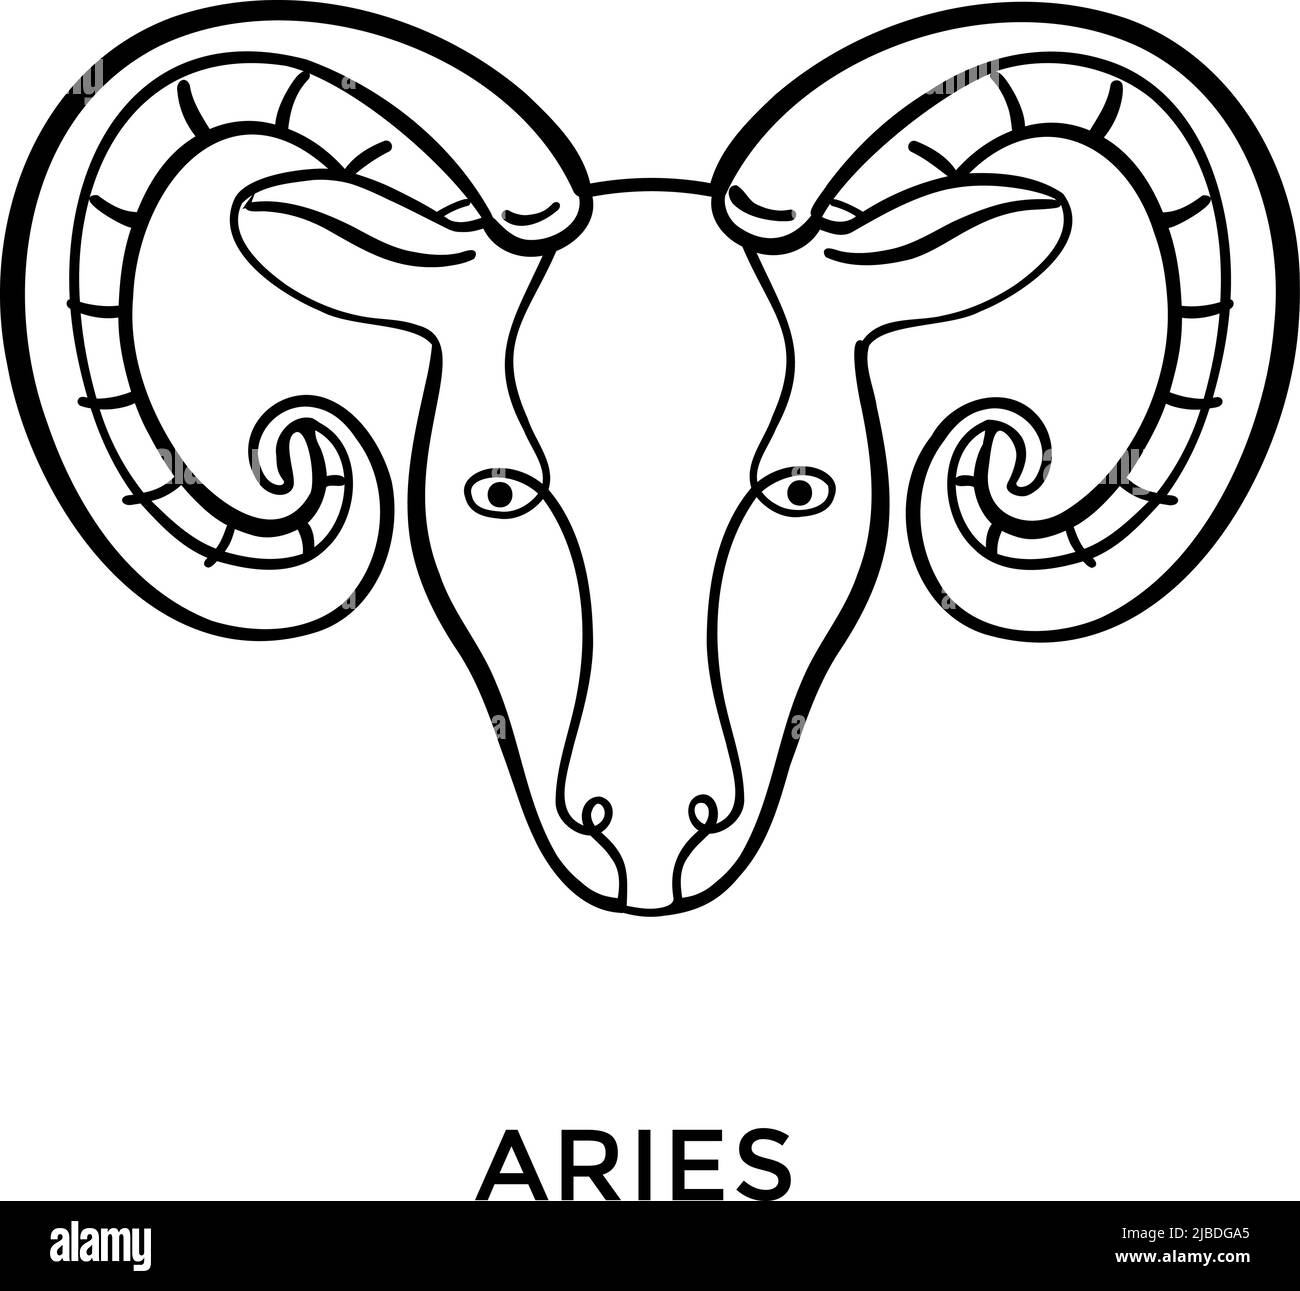 Aries Black and White Stock Photos & Images - Alamy